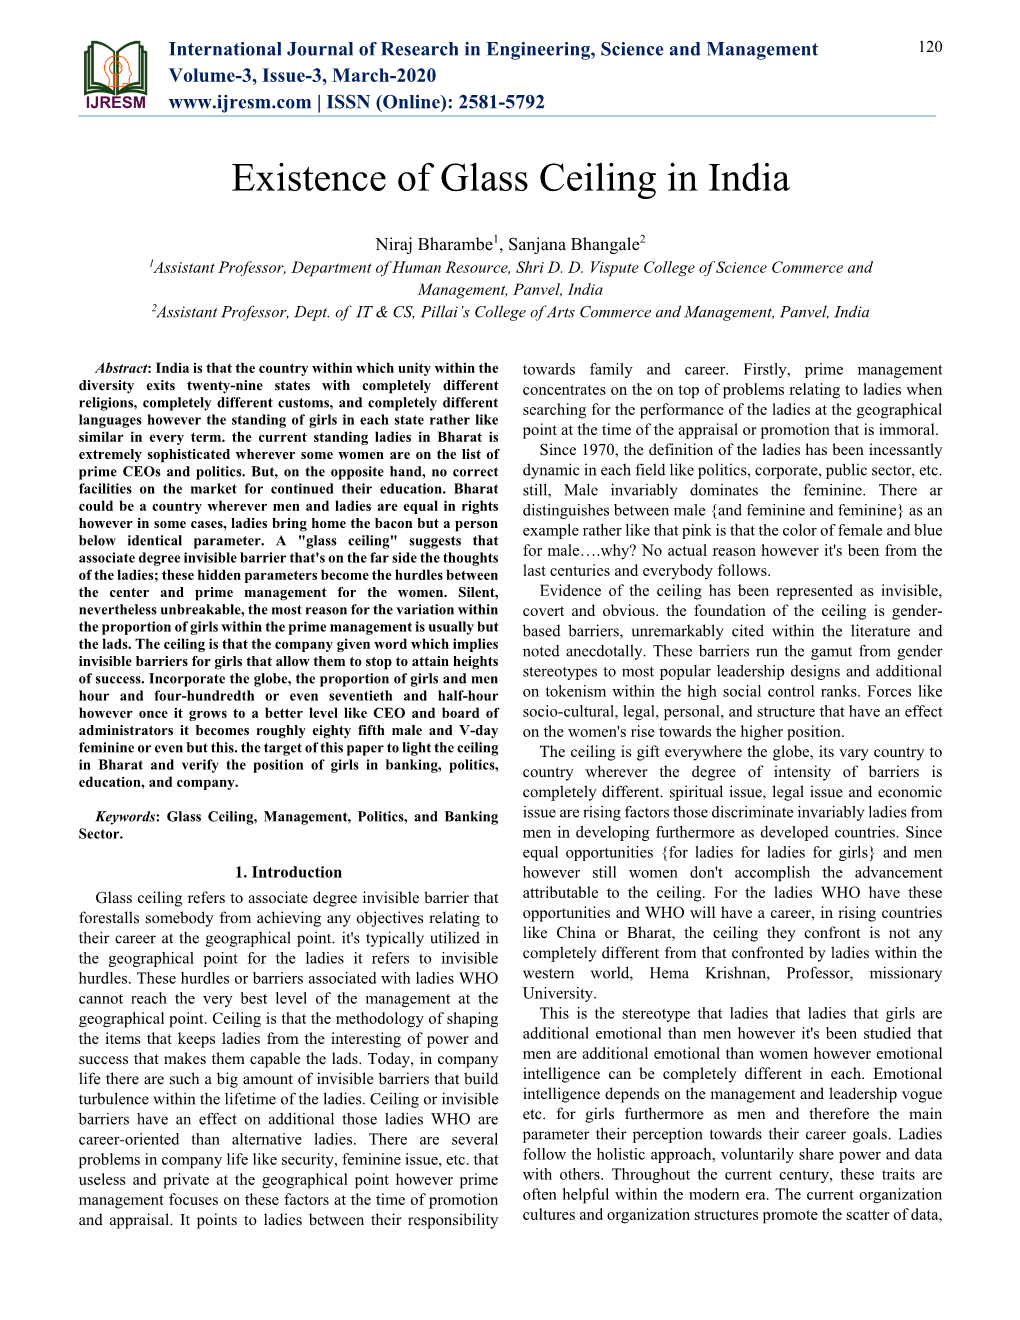 Existence of Glass Ceiling in India